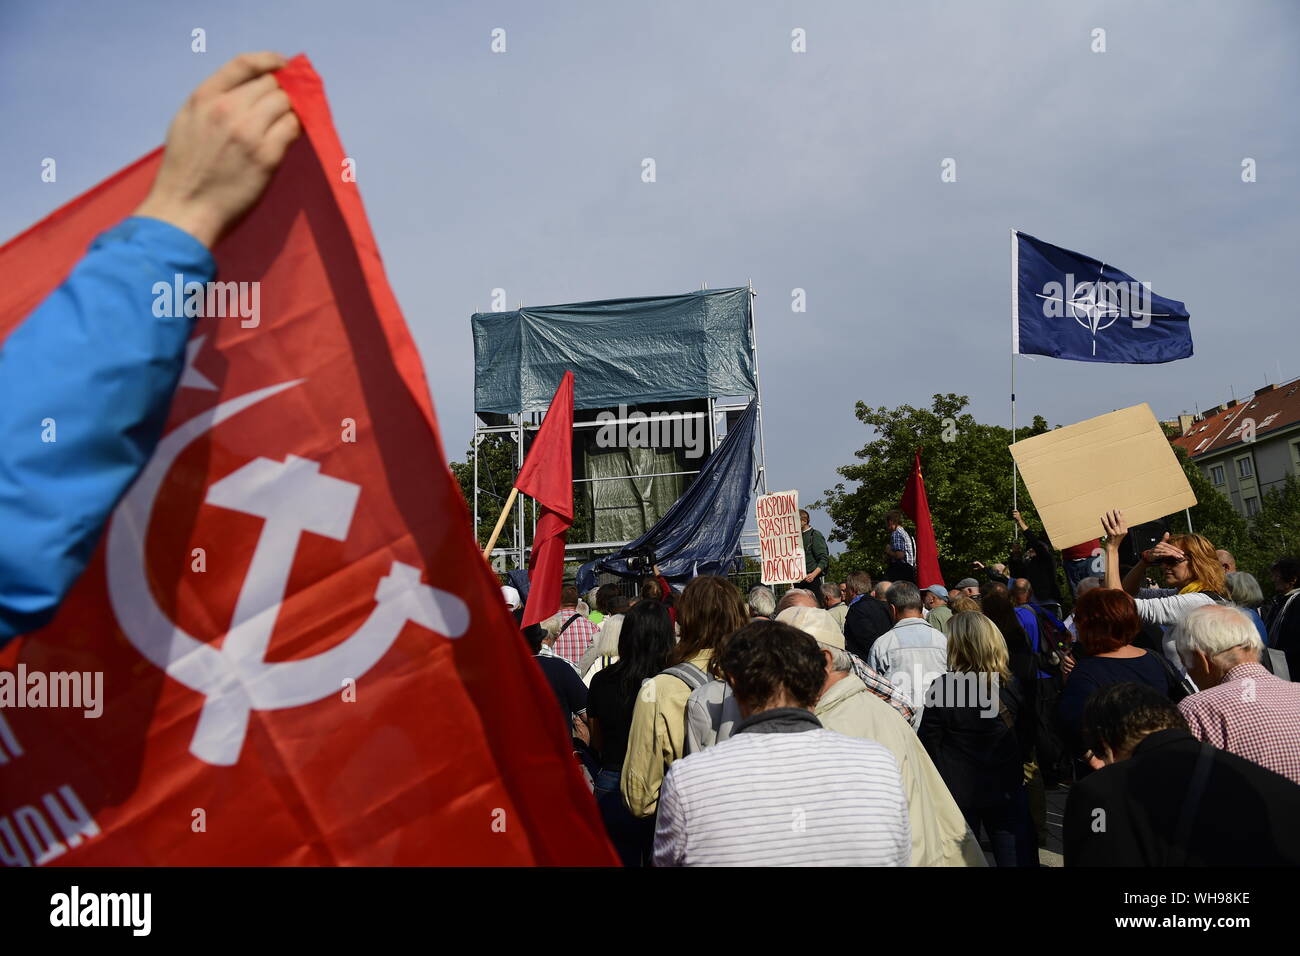 Meeting in protest against veiling of Marshal Ivan Konev statue based on local town hall's decision took place at Interbrigady square in Prague, Czech Republic, on September 2, 2019. (CTK Photo/Roman Vondrous) Stock Photo